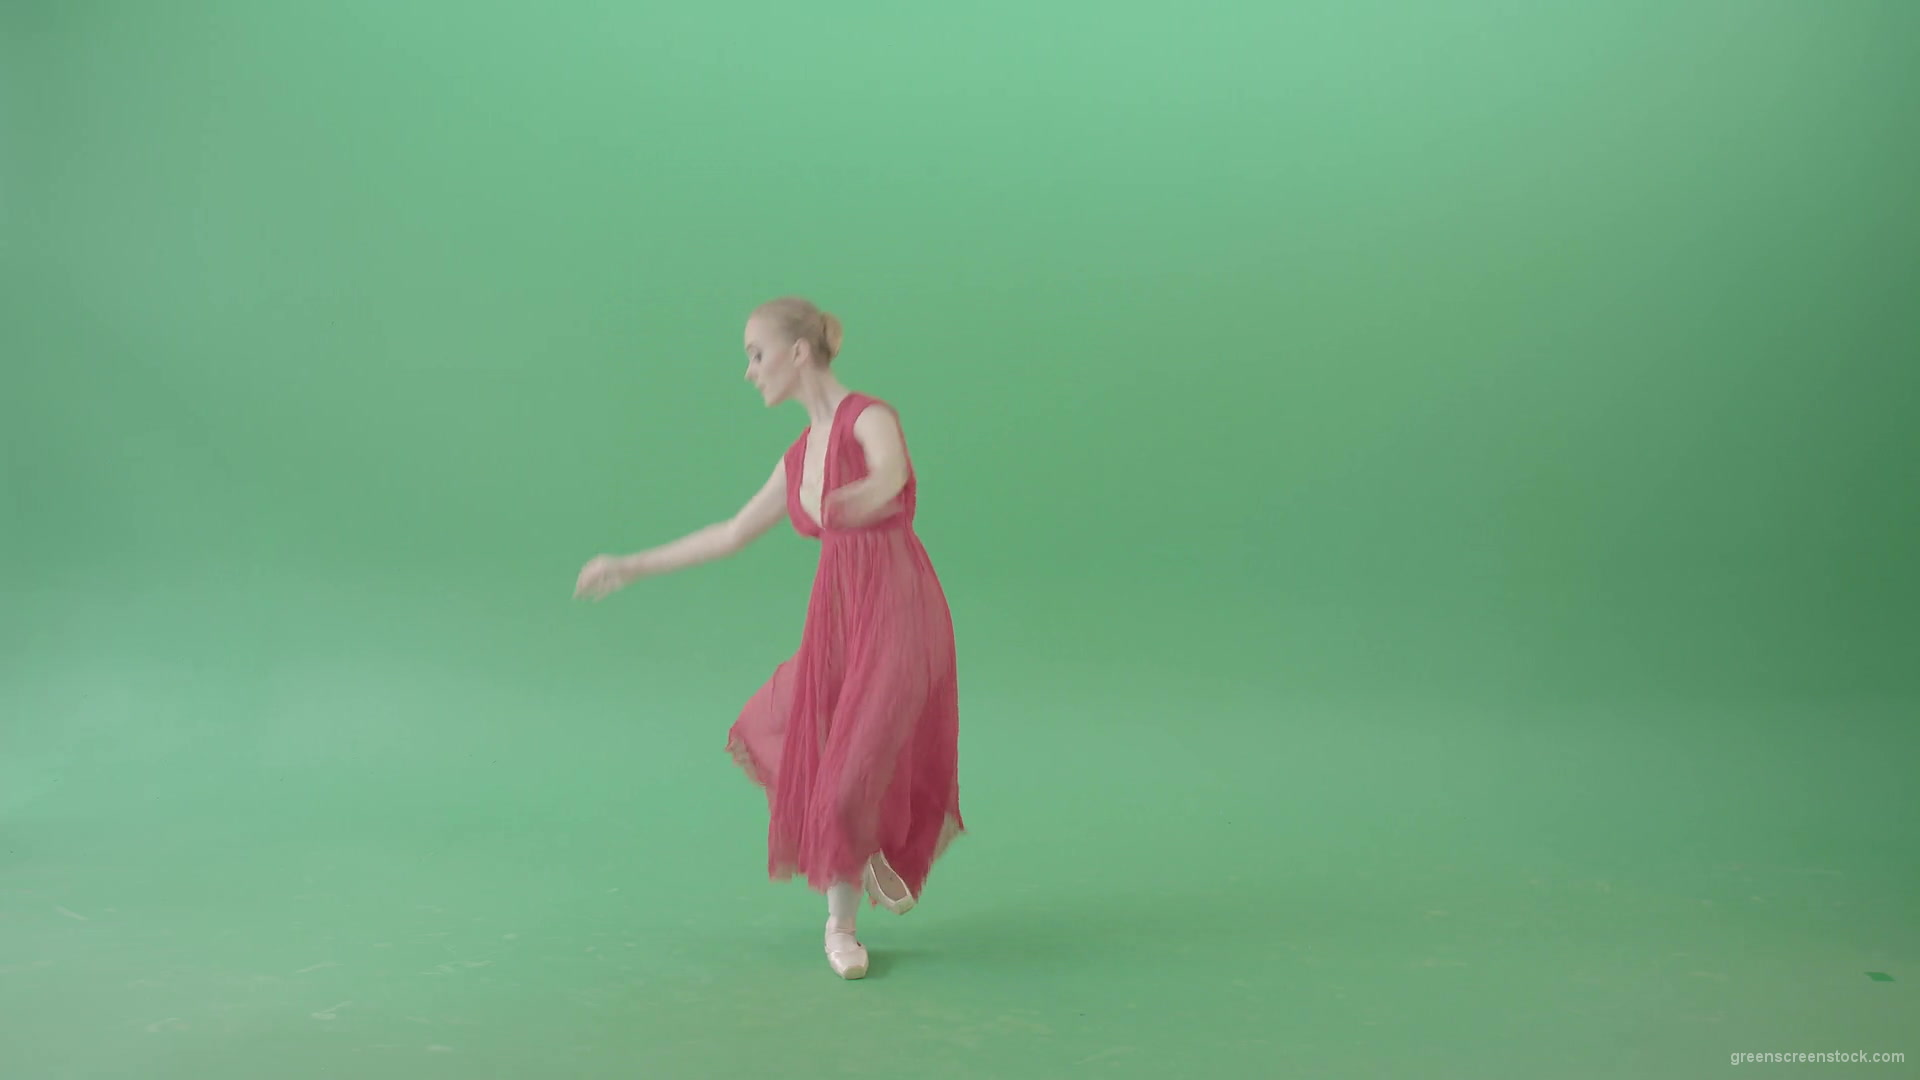 Blonde-girl-in-red-dress-dancing-classical-ballet-on-green-screen-4K-video-footage-1920_009 Green Screen Stock